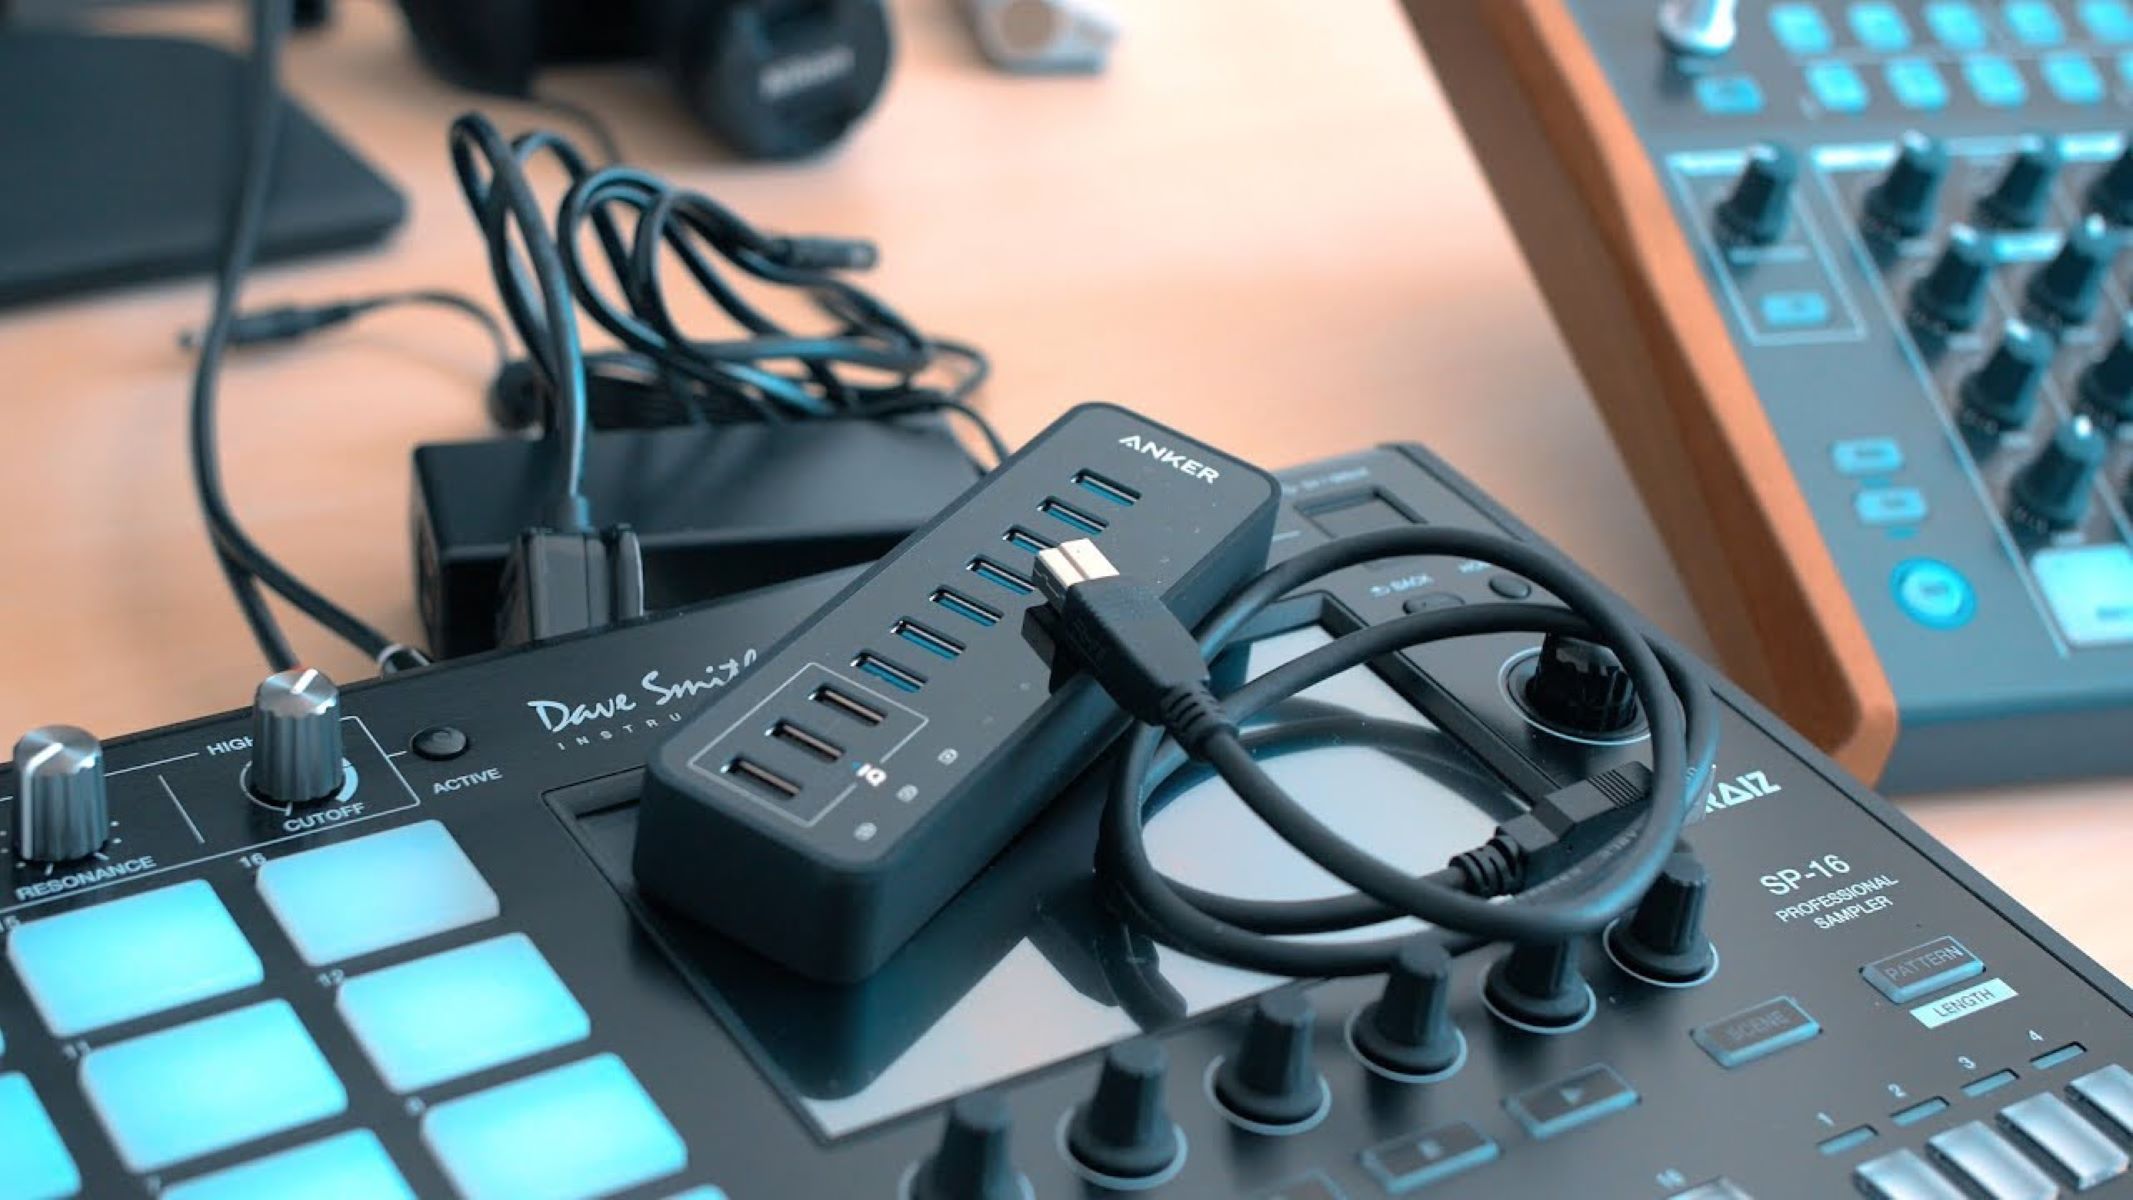 What Is A Good USB Hub For MIDI Controllers